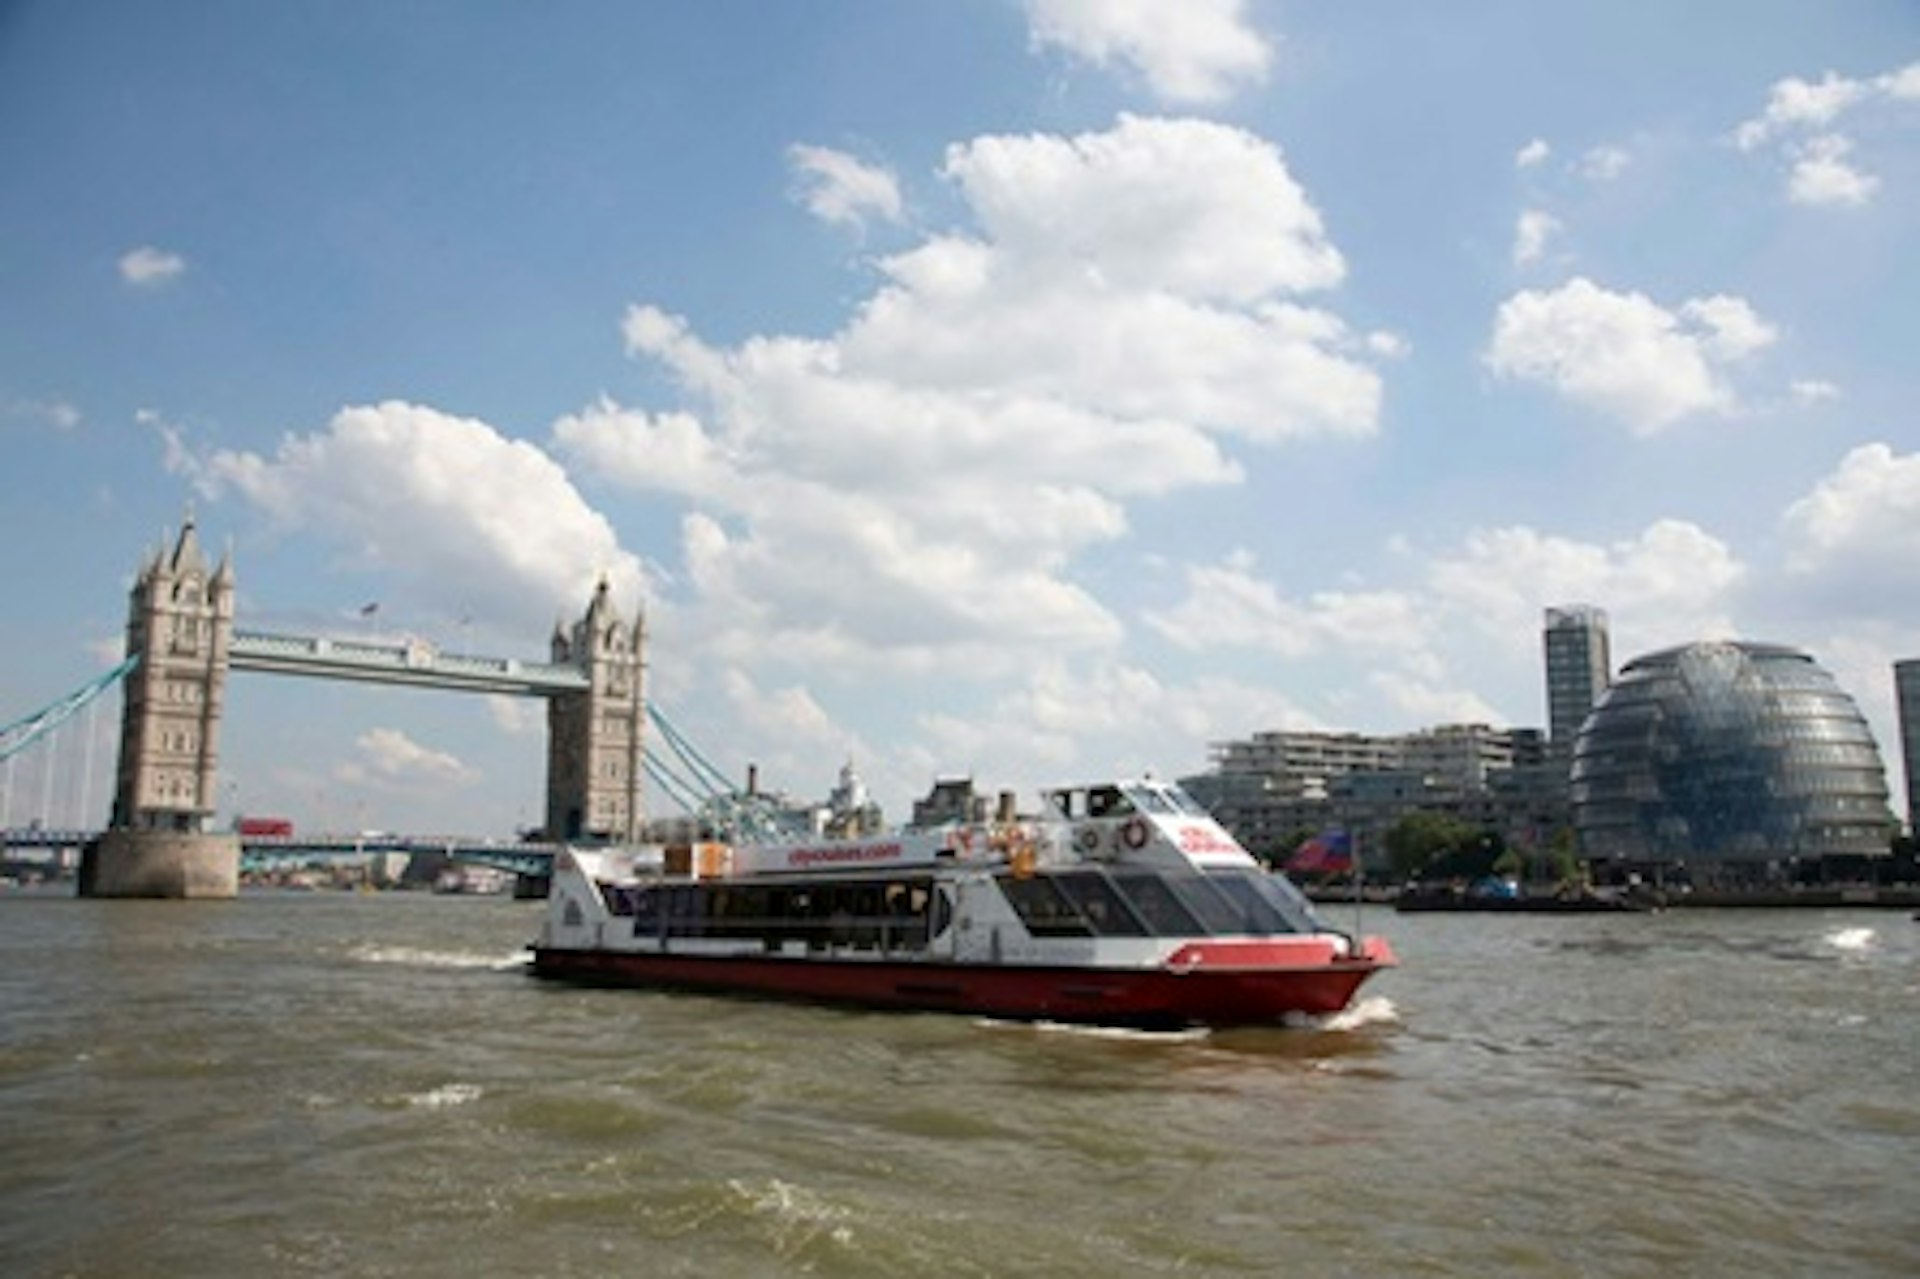 Three Course Meal at a Marco Pierre White Restaurant and Thames River Sightseeing Cruise for Two